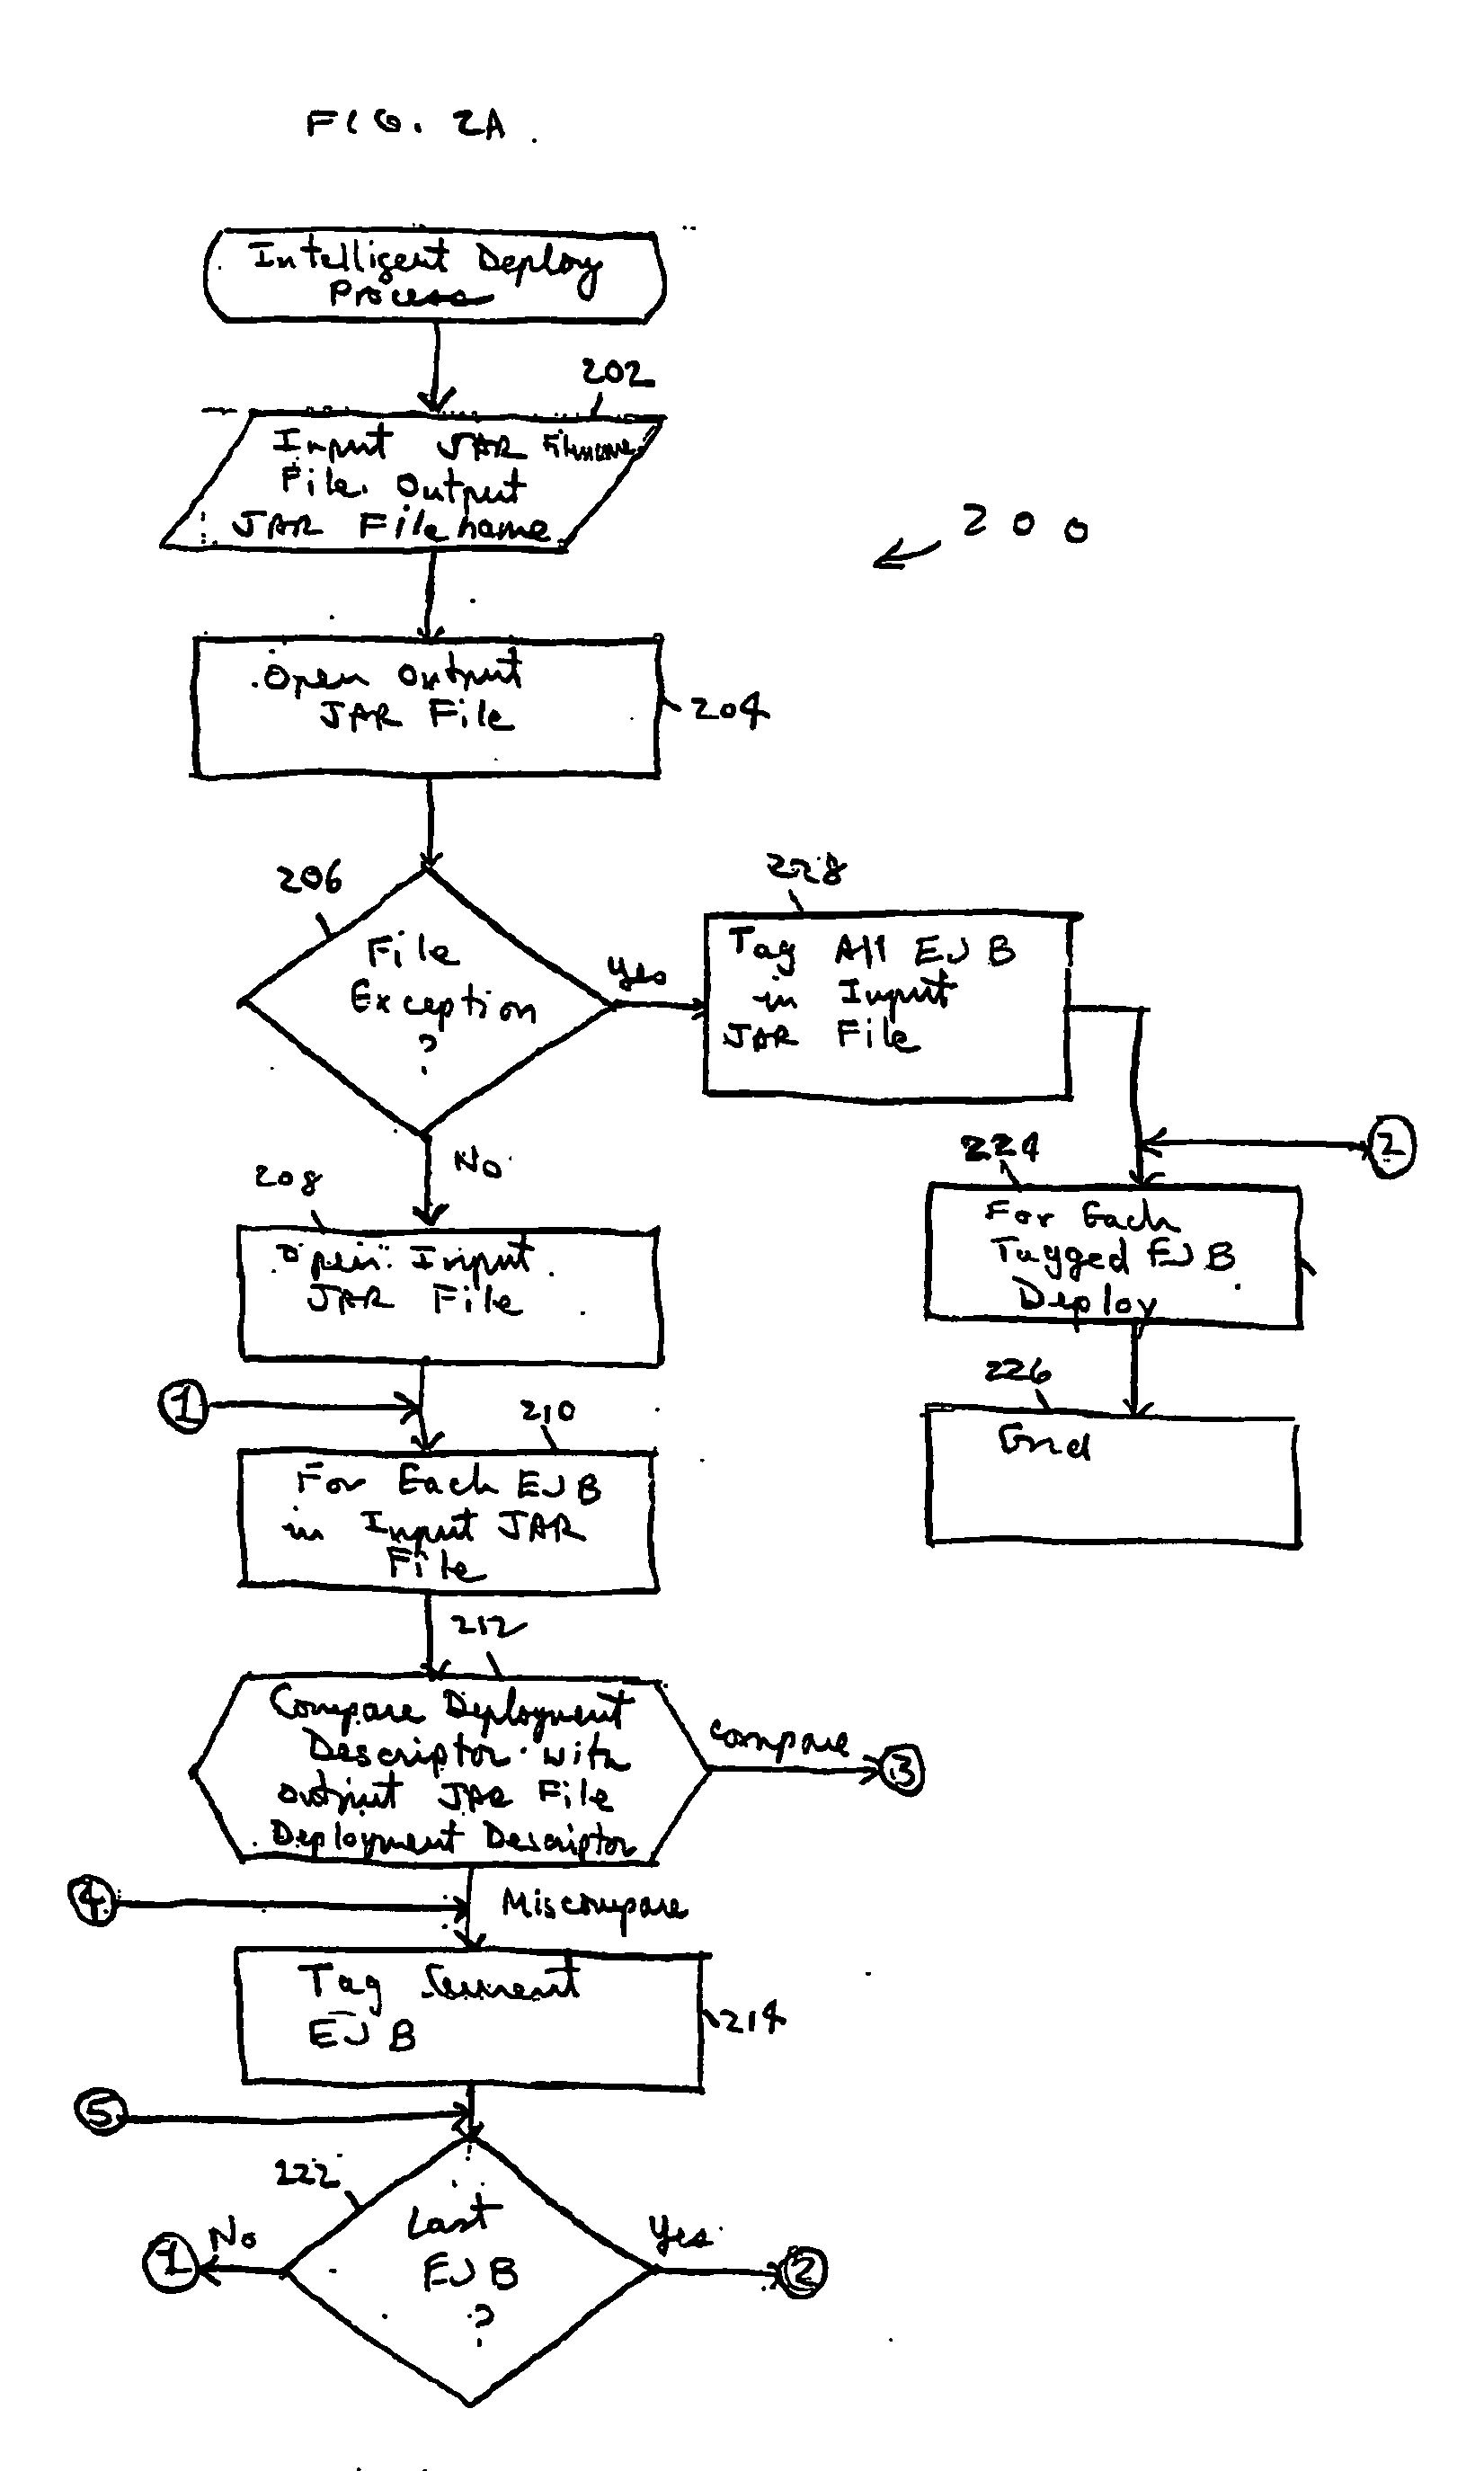 Systems and method for the incremental deployment of Enterprise Java Beans